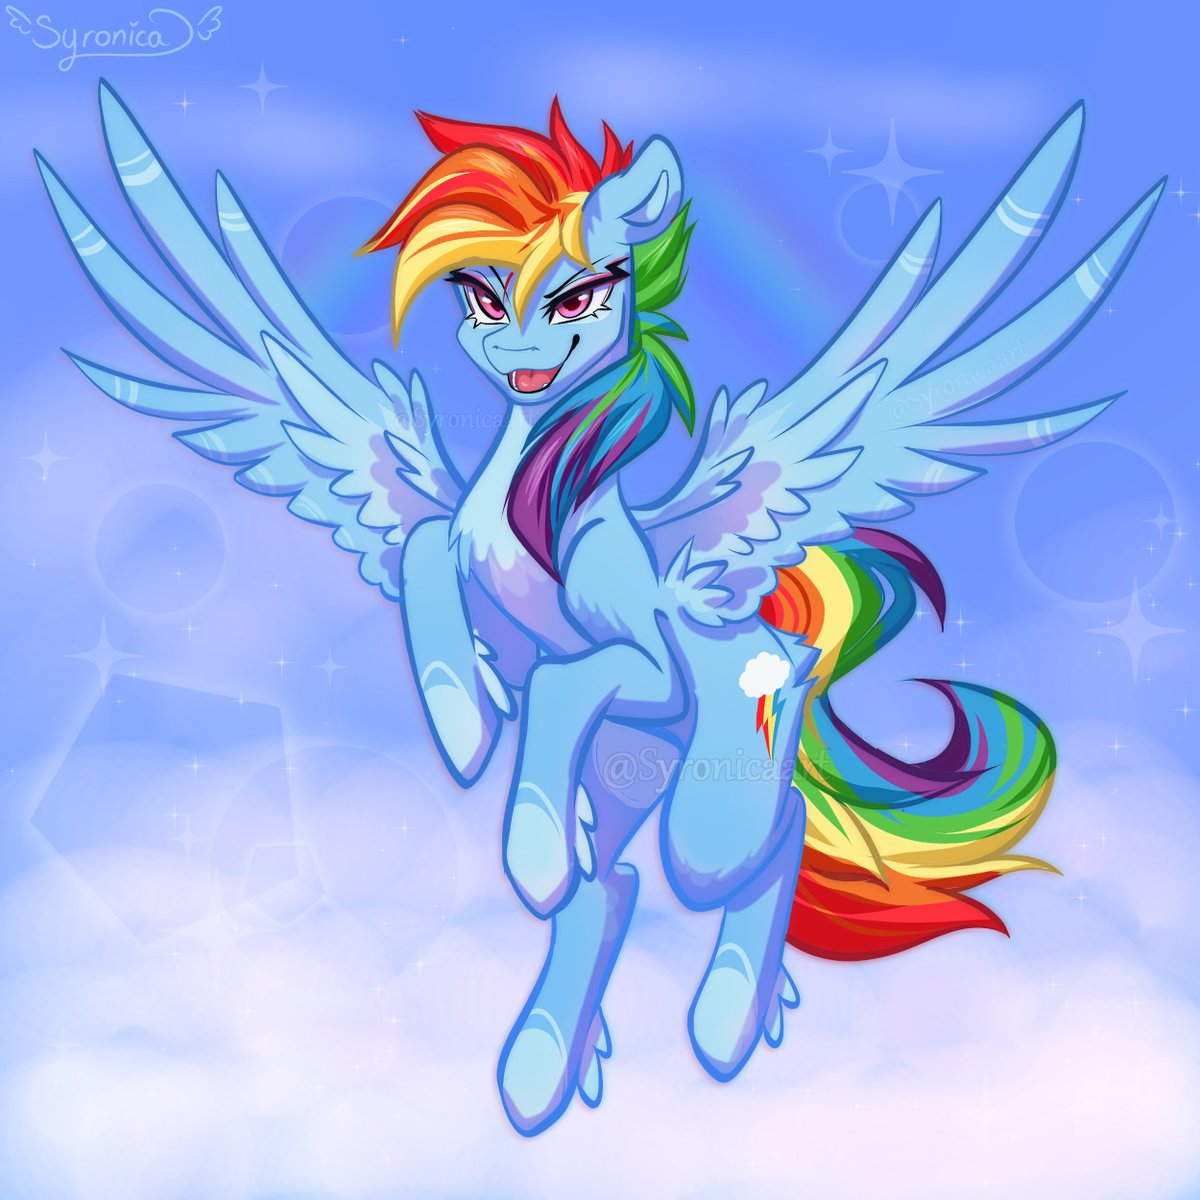 Rainbow Dash was my favorite of the six during my younger years. 🌈I still thing she's very cool but I seem to relate more with Rarity for the most part XD #mlp #mlpfim #rainbowdash #fanart #digitalart